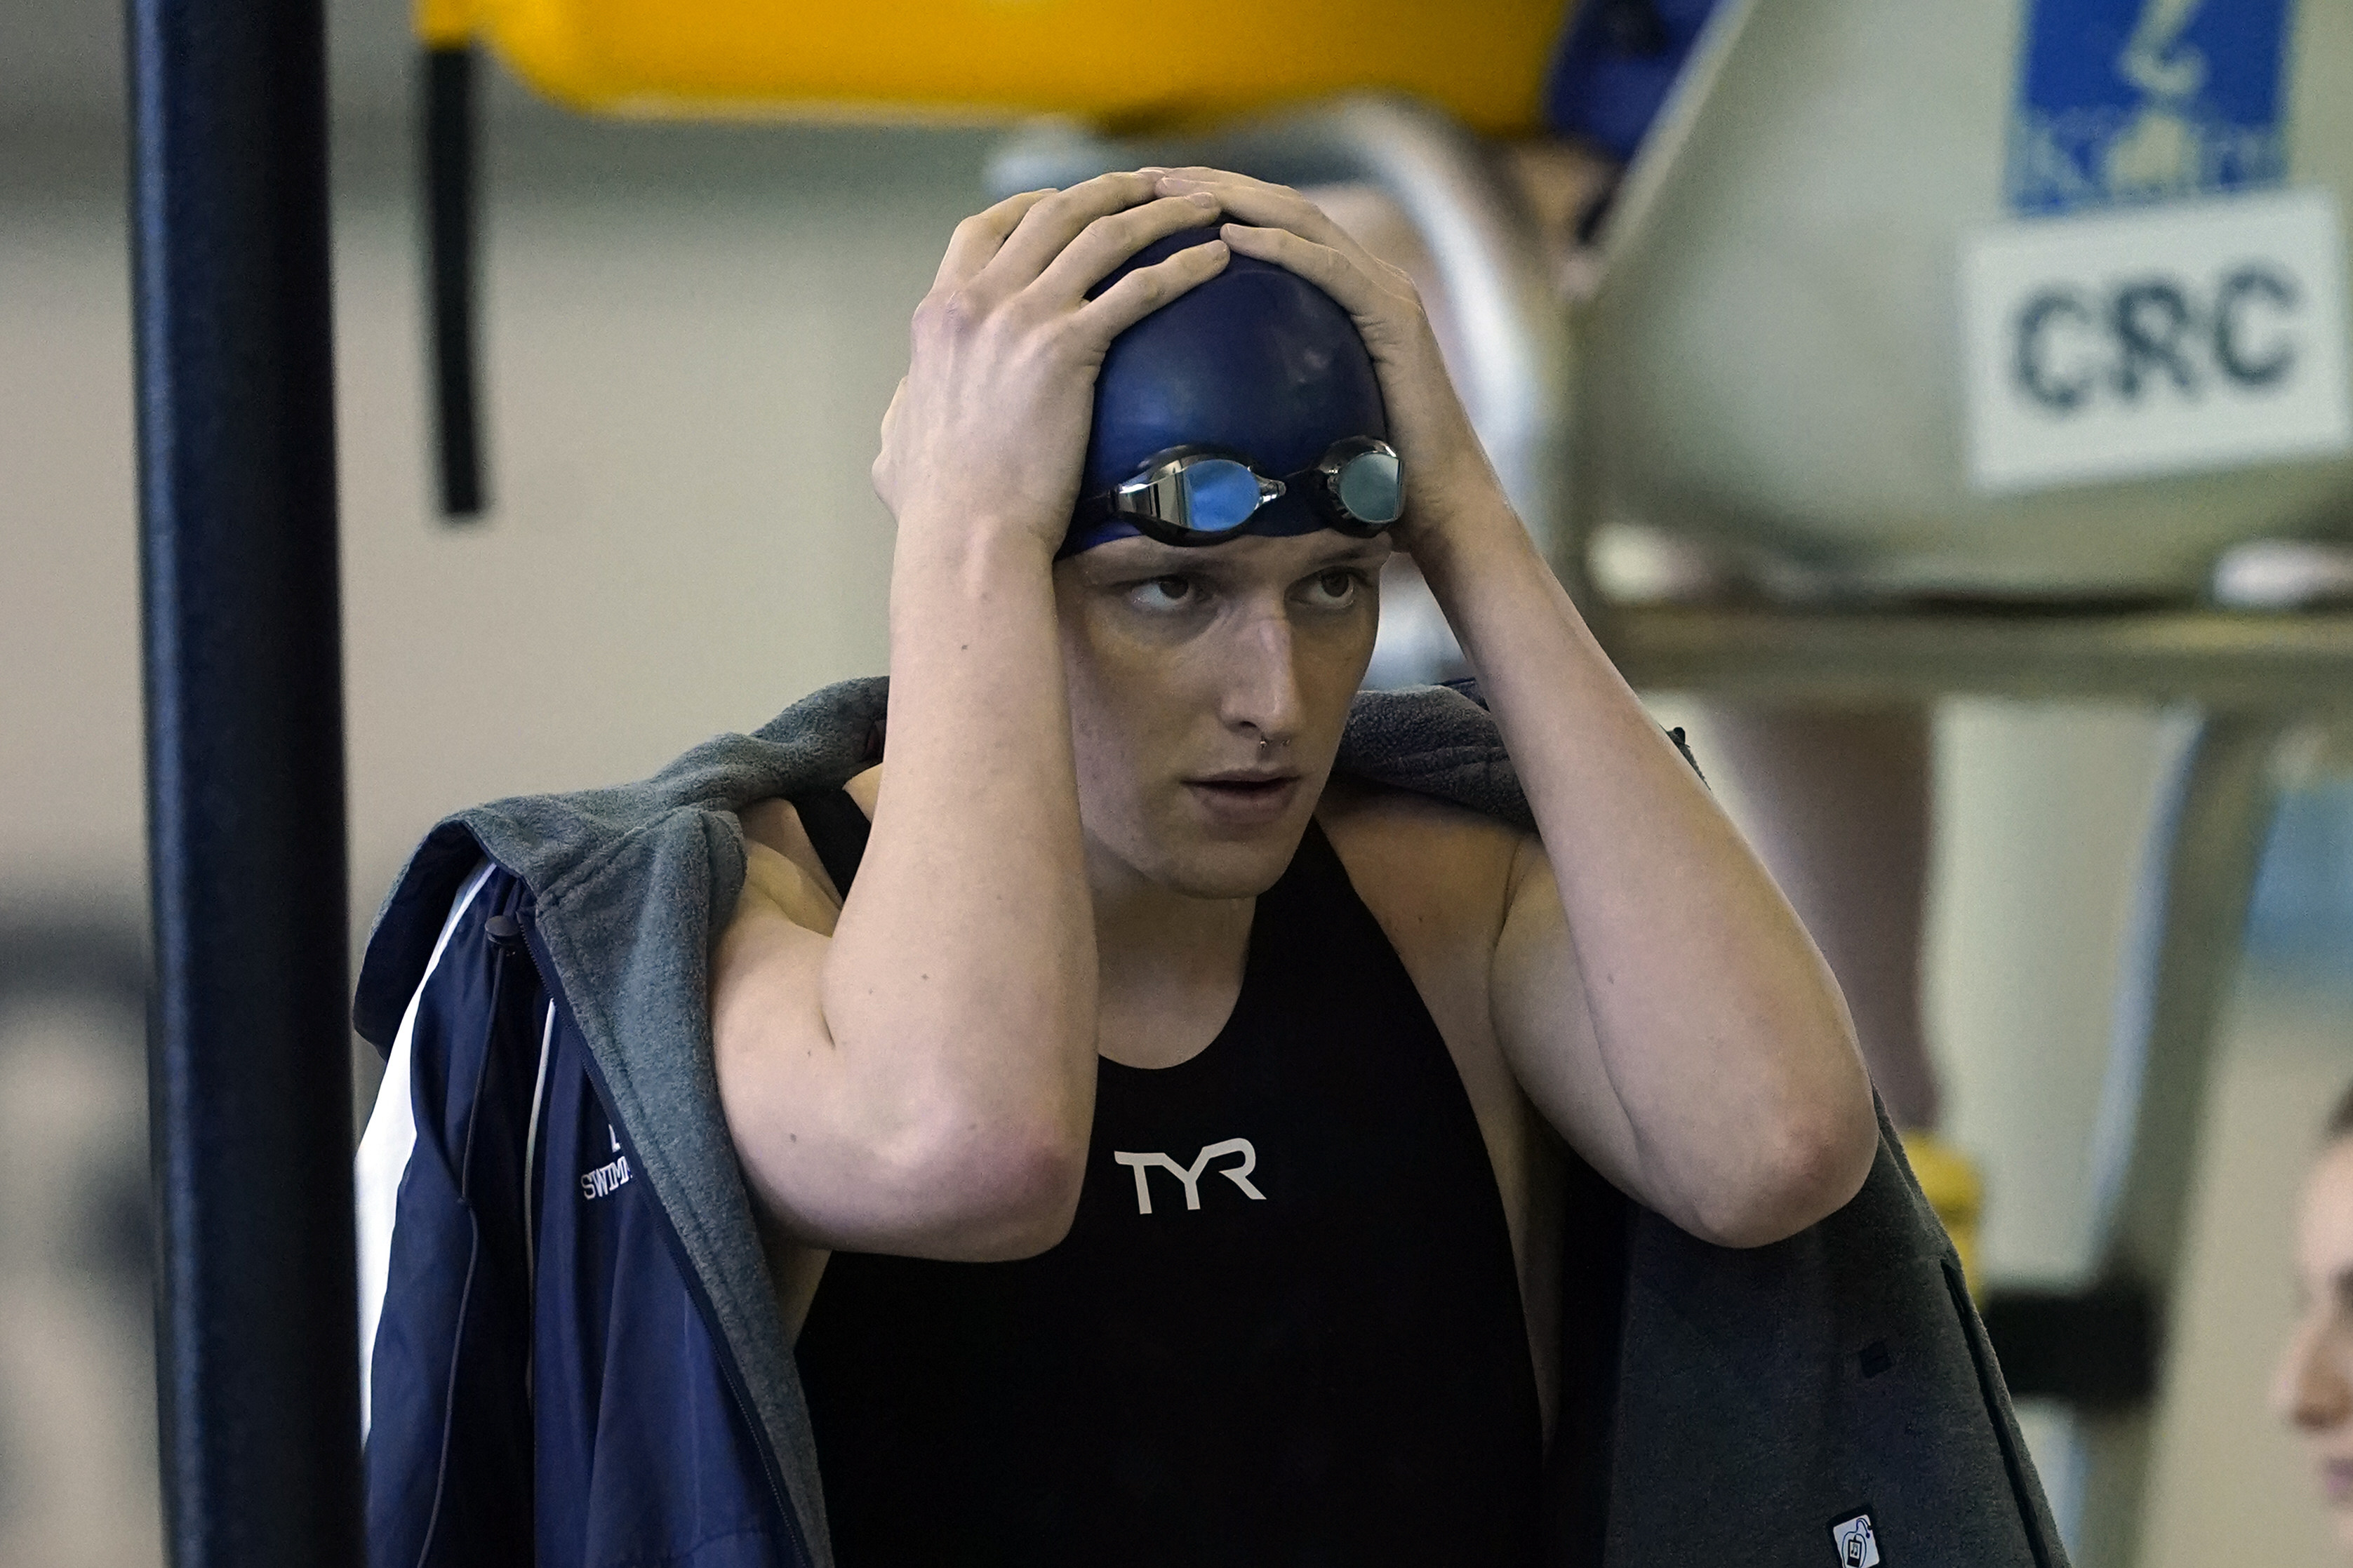 The debate over US transgender swimmer Lia Thomas’ right to compete preceded swimming’s ruling. Photo: AP